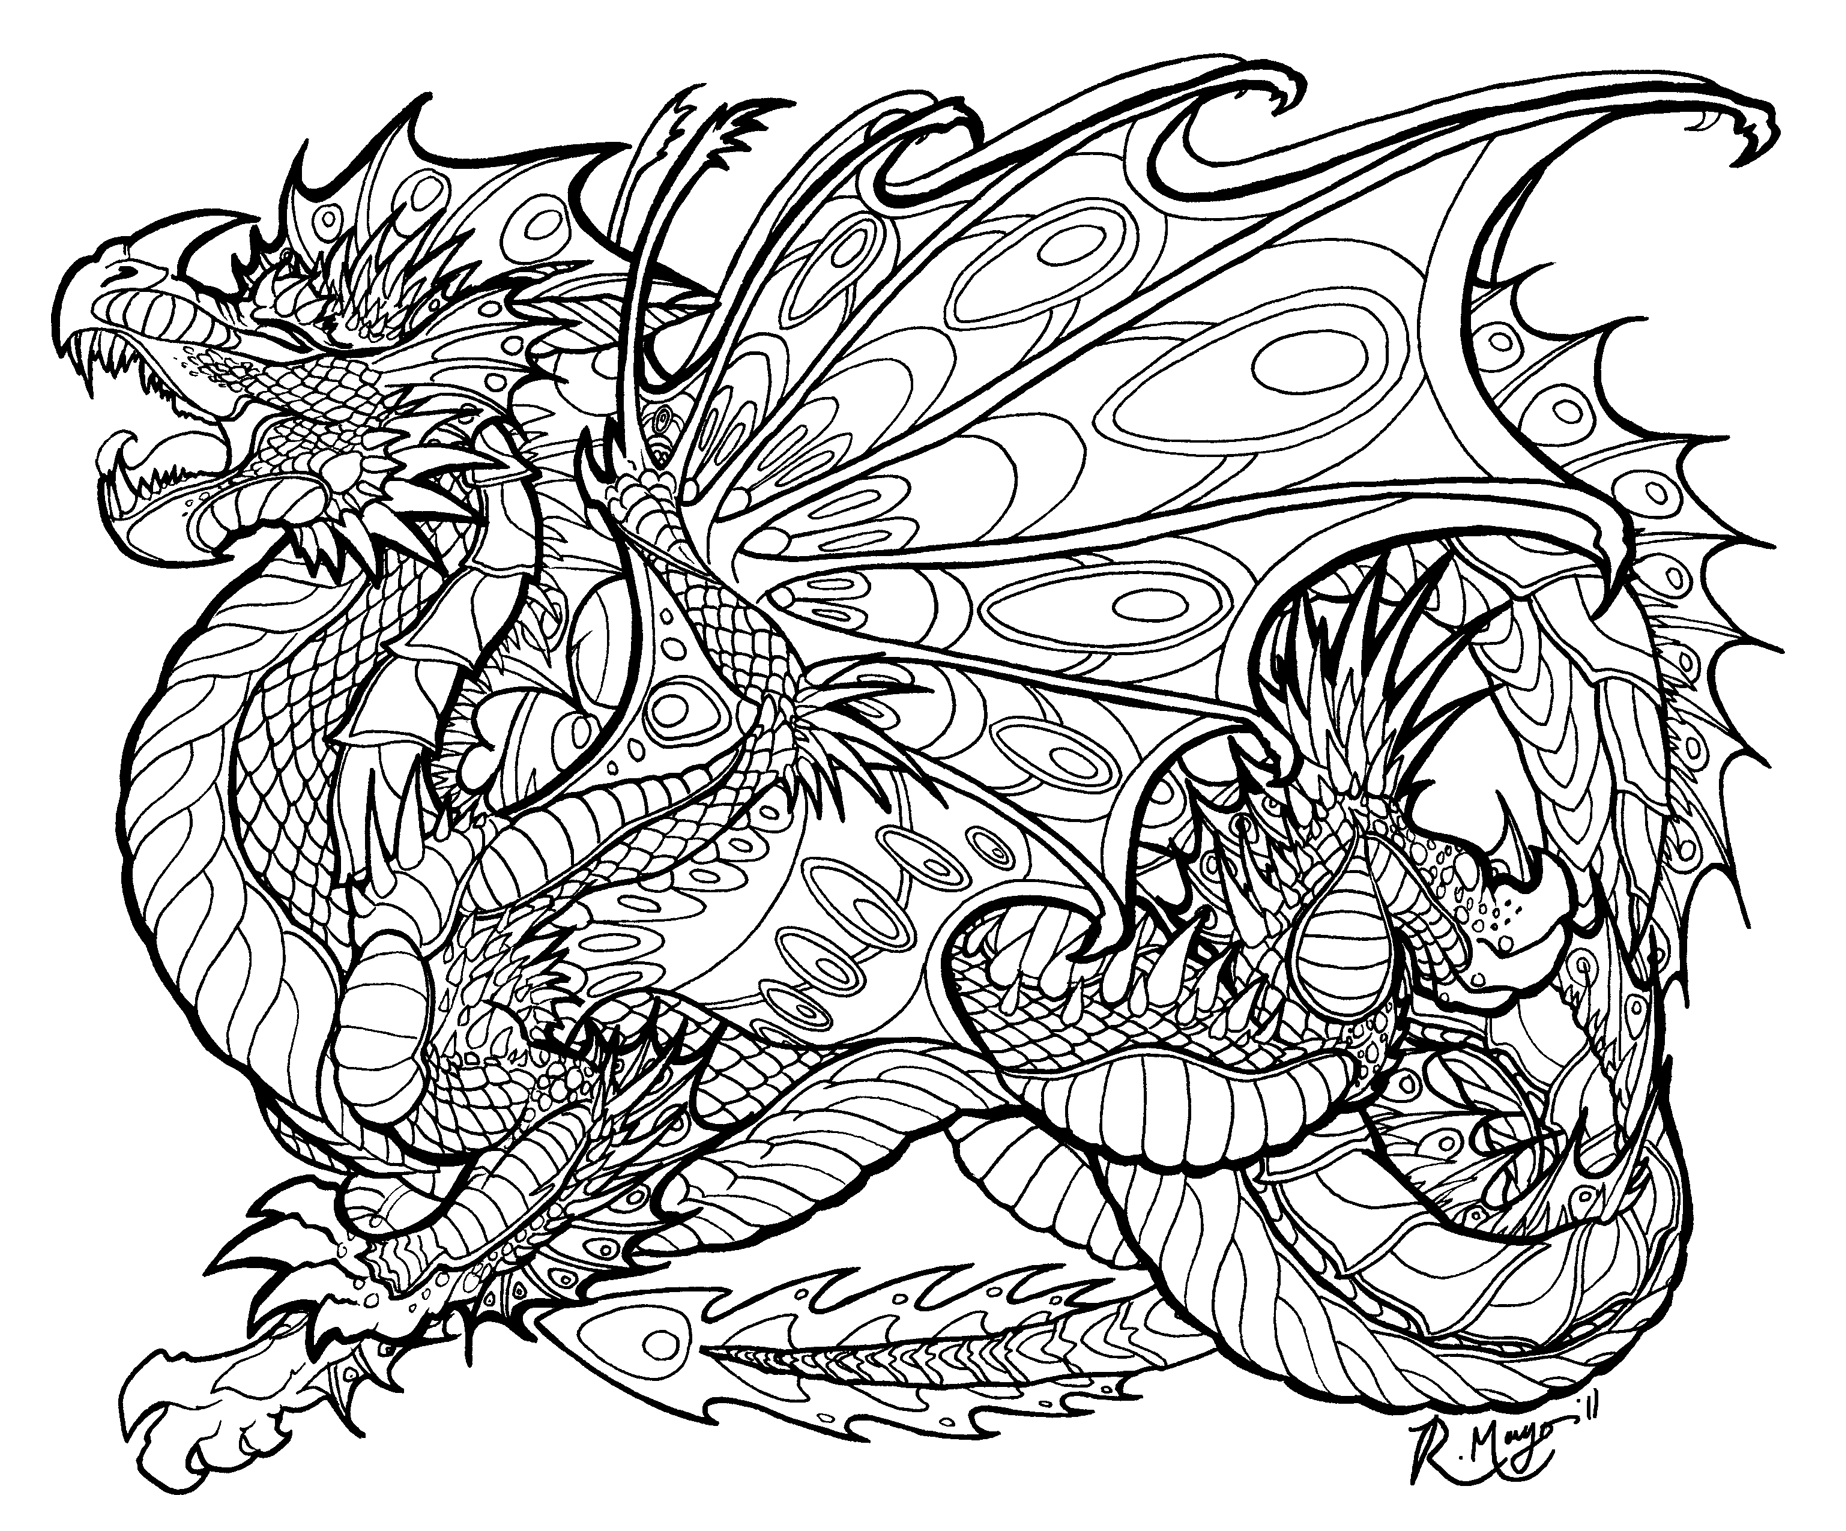 Coloring Pages For Adults Difficult Dragons at GetDrawings Free download